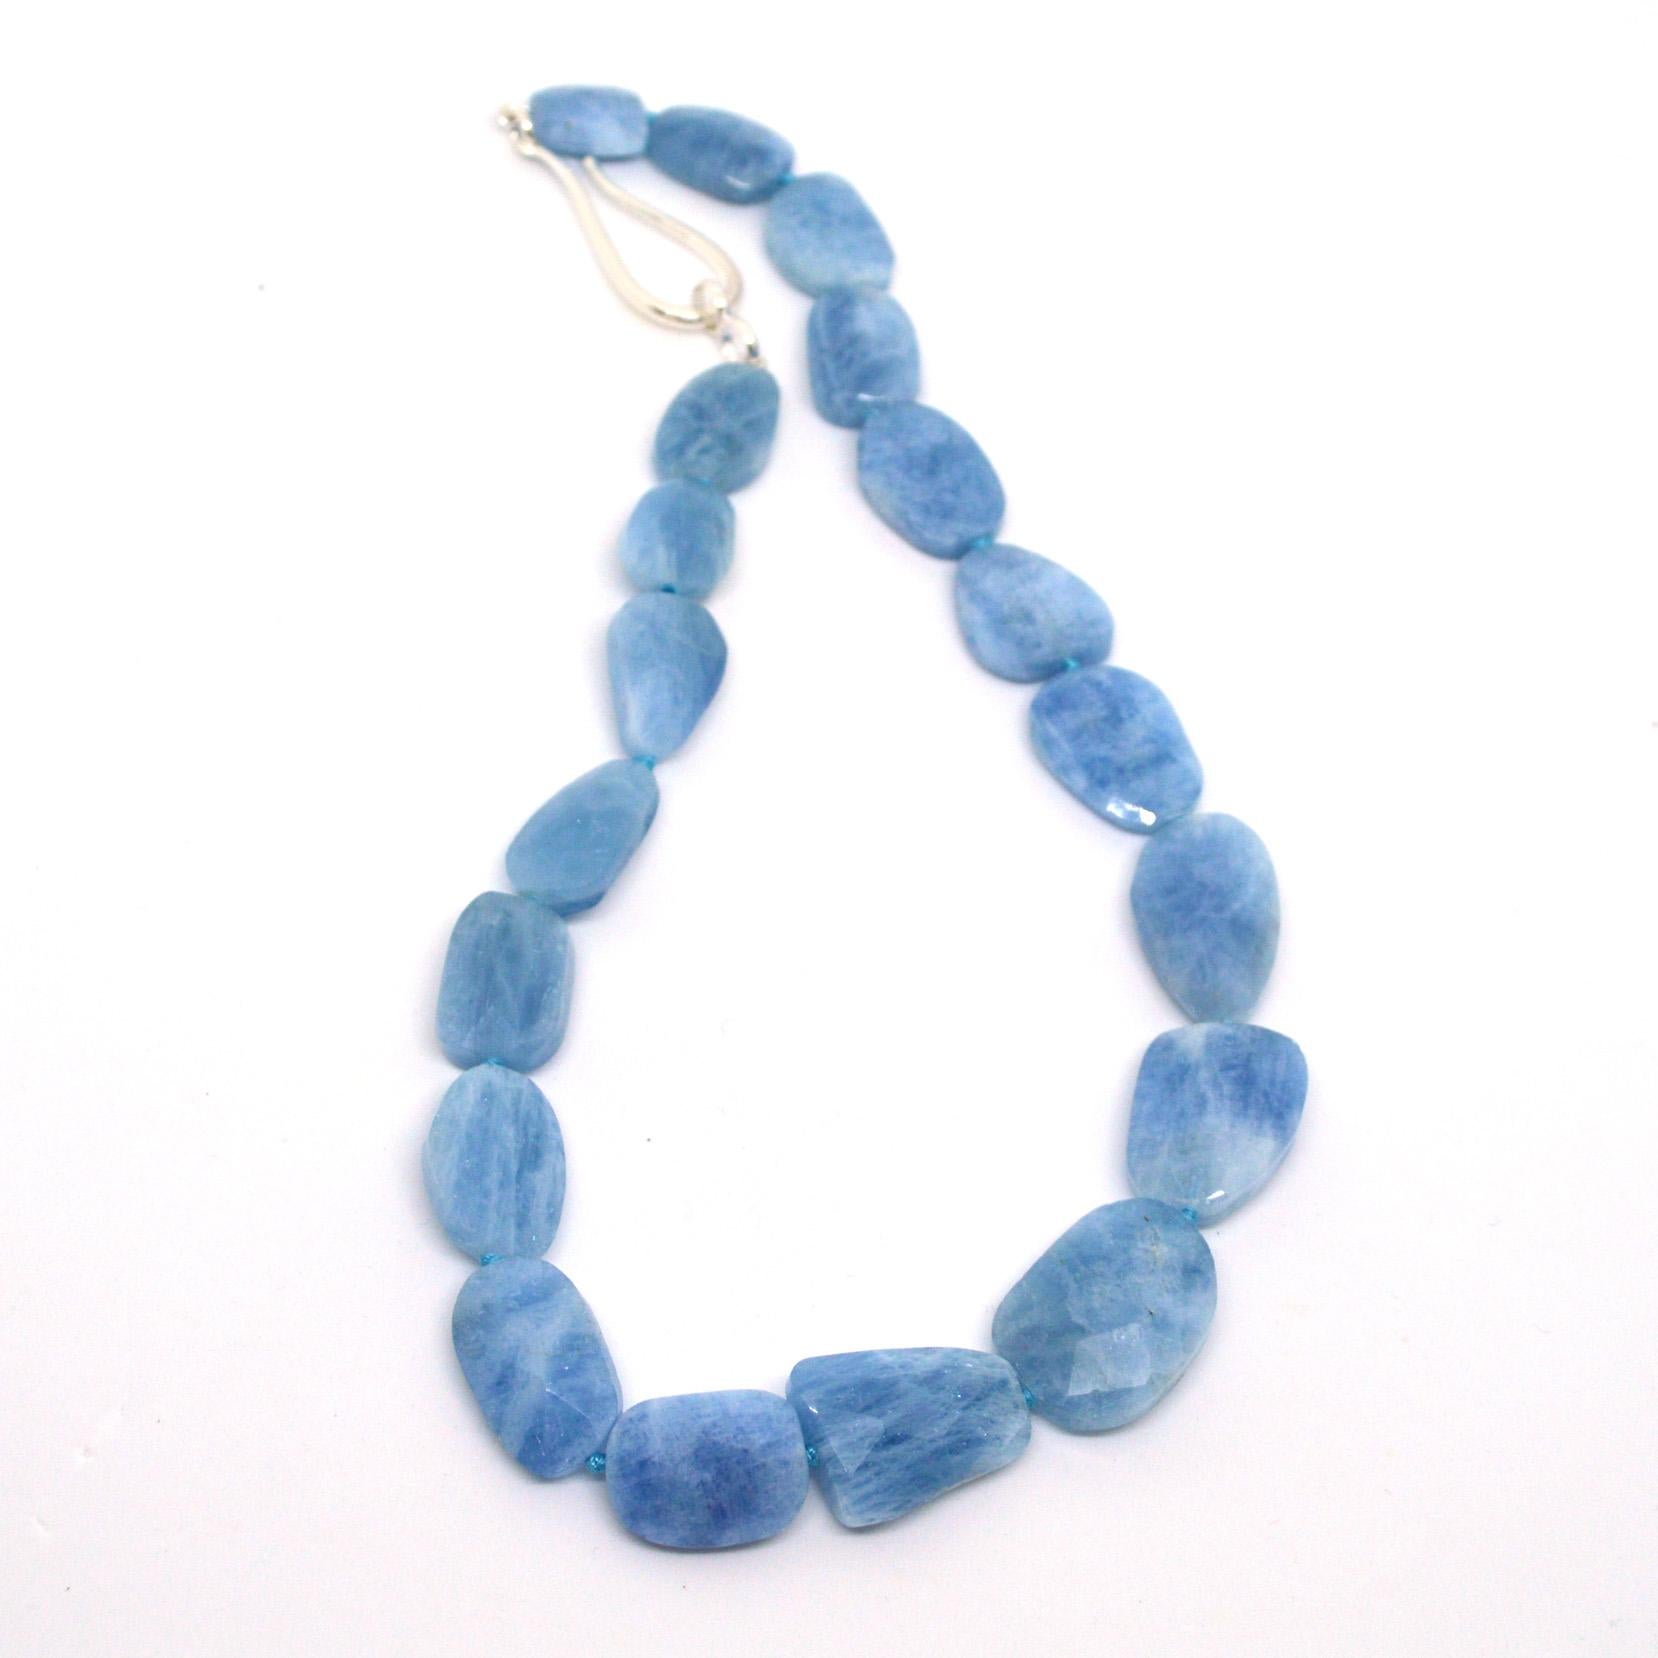 Aquamarine flat faceted nuggets graduated from 15mm to 25mm and there are 19 stones. Hand knotted on matching aqua thread with a 55mm sterling silver hook clasp.
Finished necklace measures 48cm 